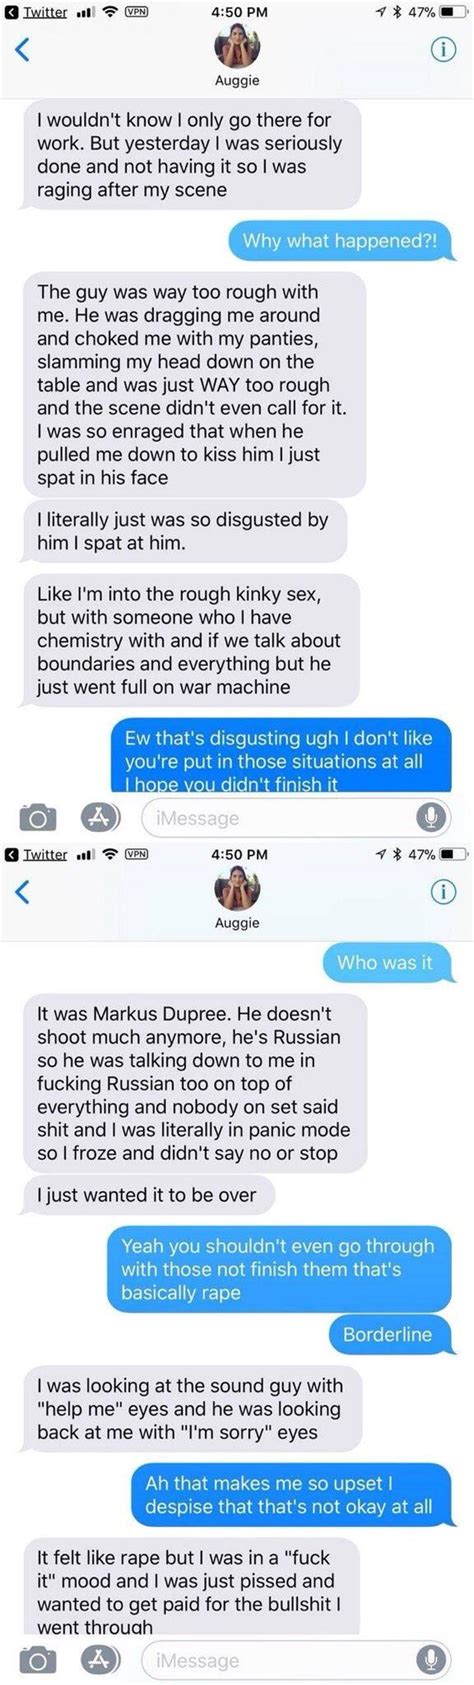 August Ames Texts About Last Scene With Markus Dupree August Ames